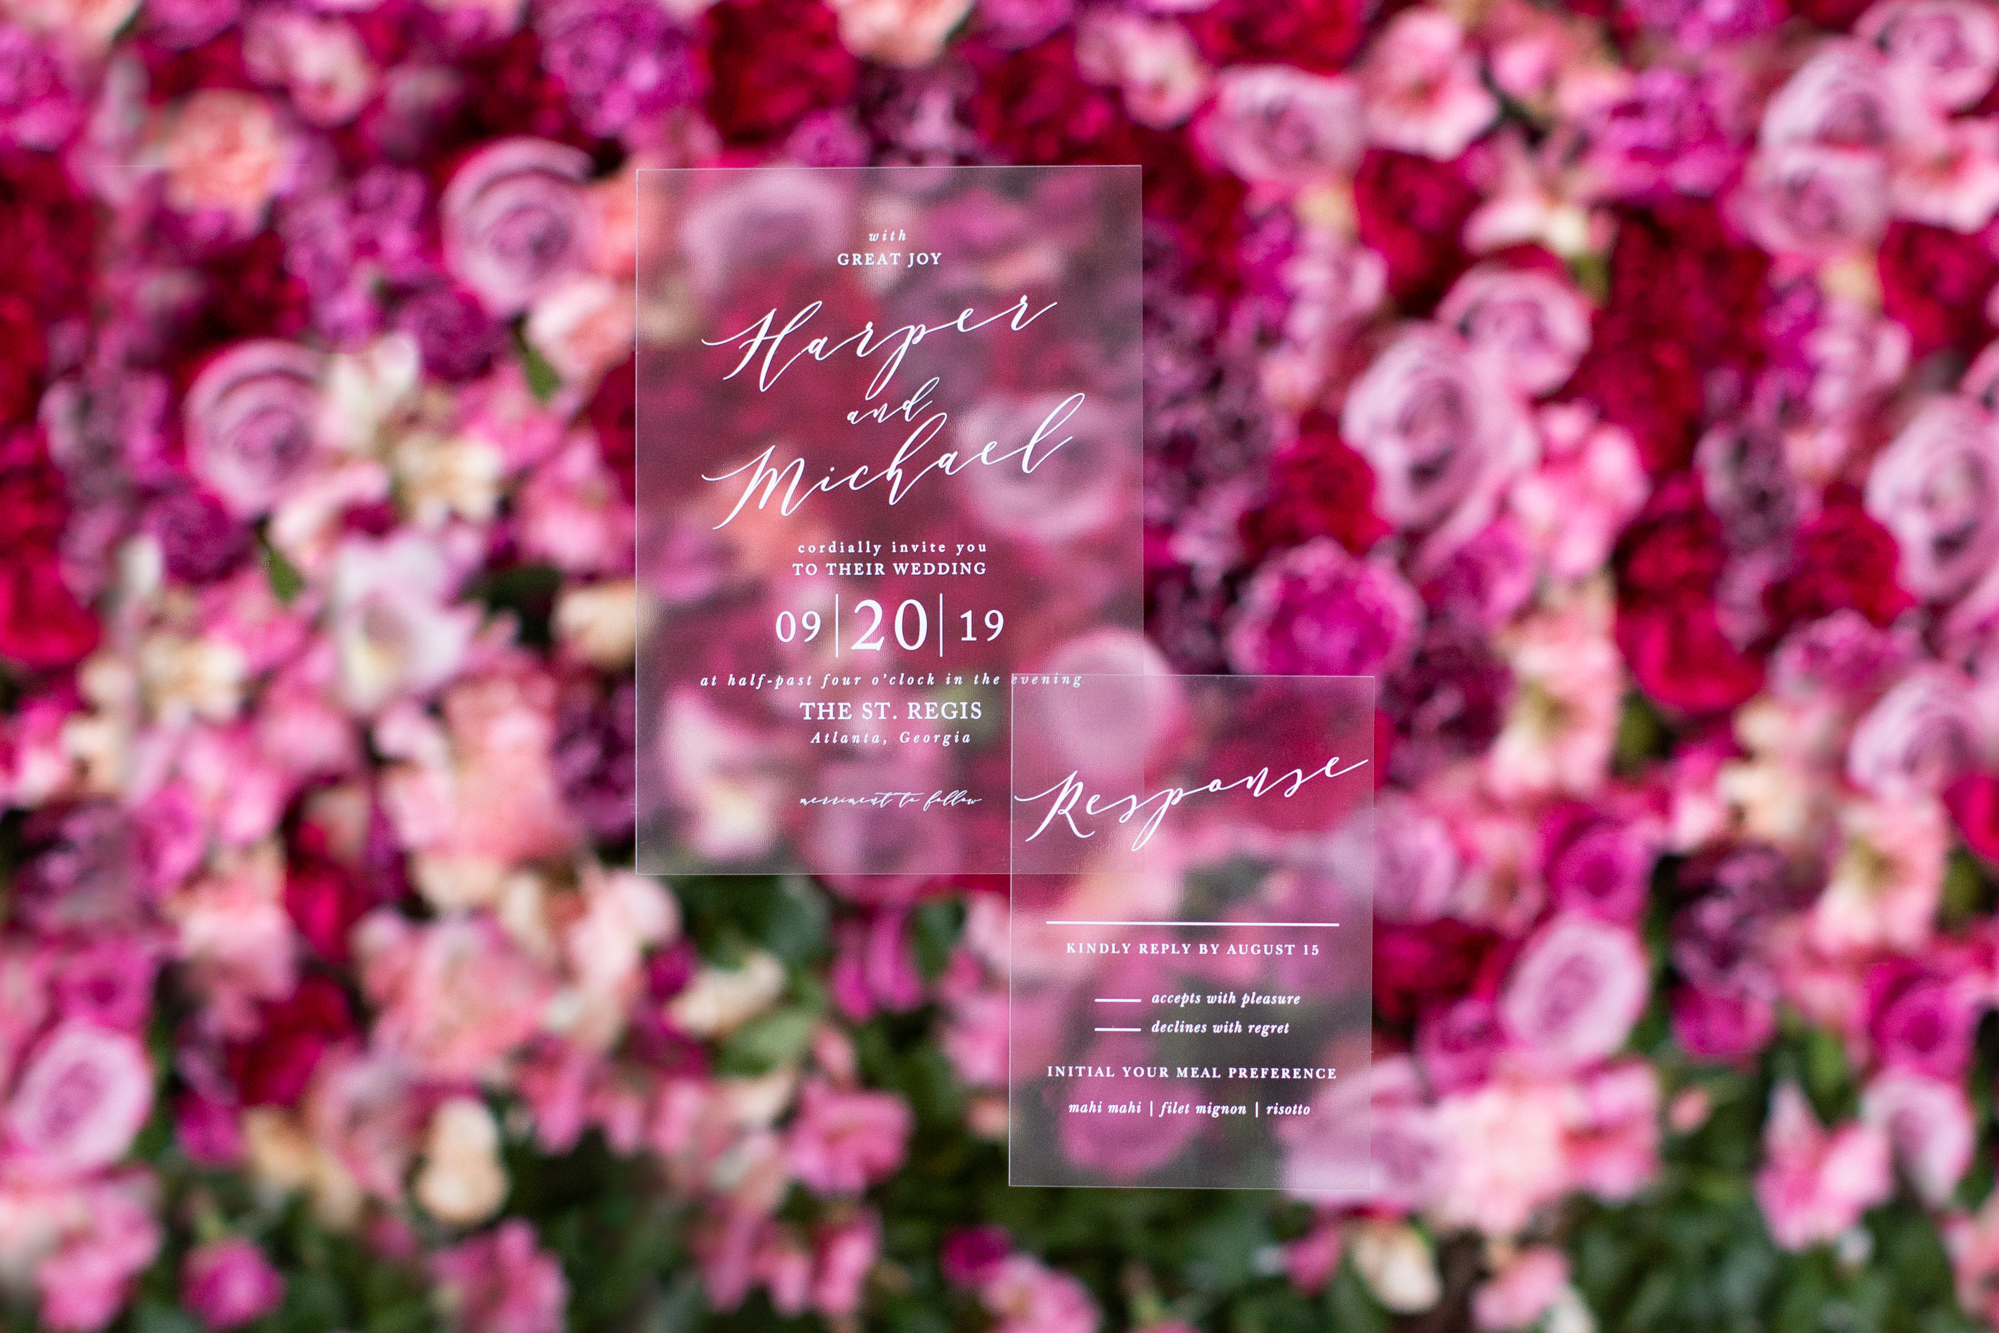 Custom clear wedding invitations against a pink flower wall. Does it get any better than this?